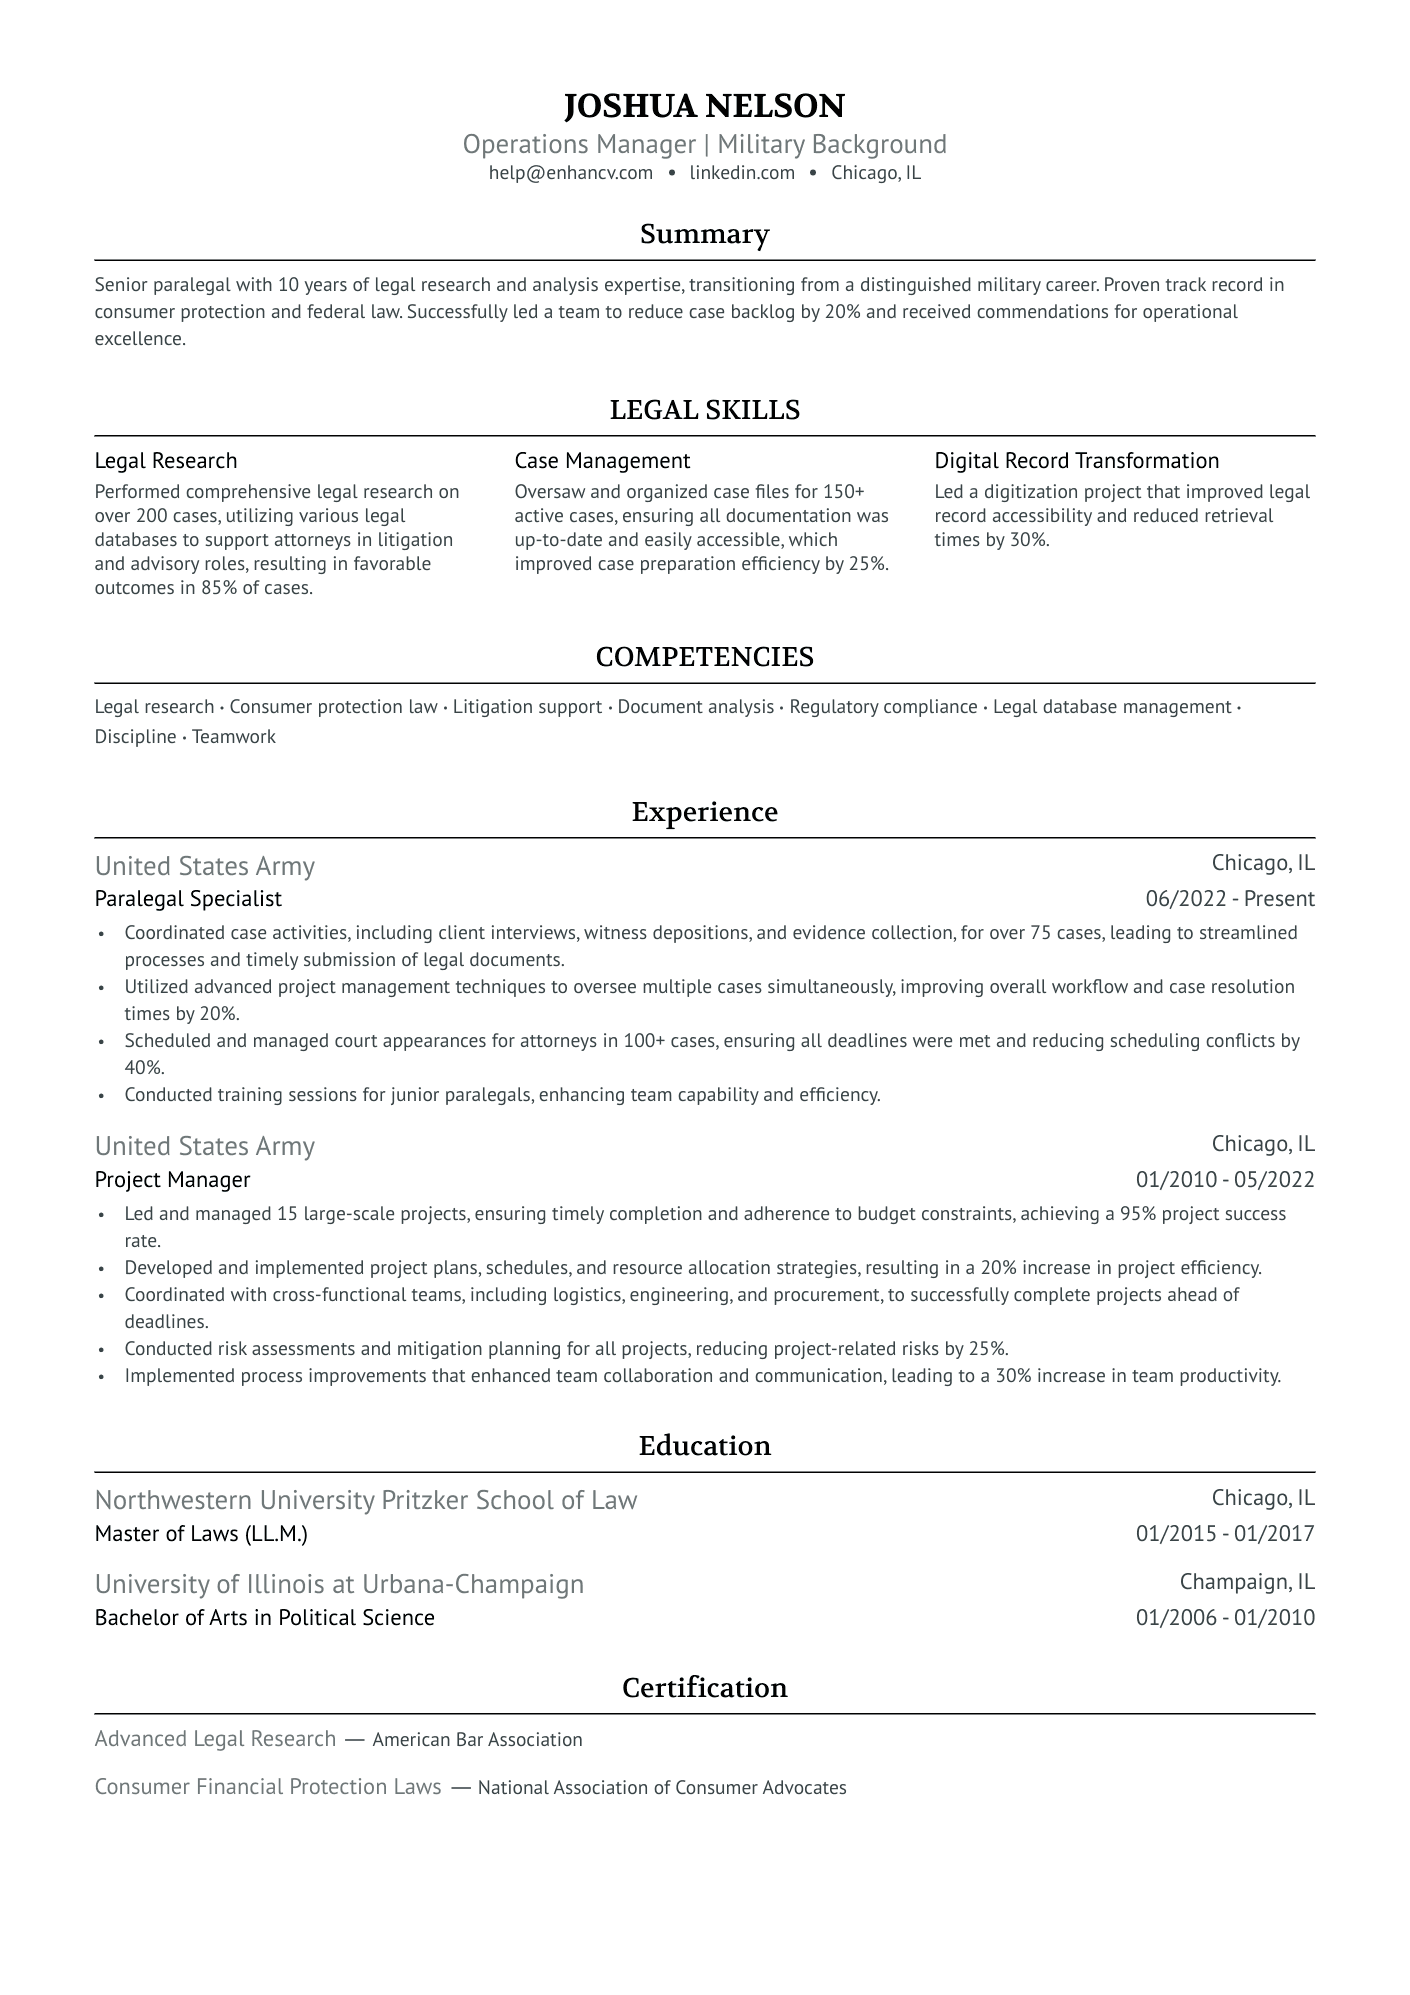 Operations Manager | Military Background resume example